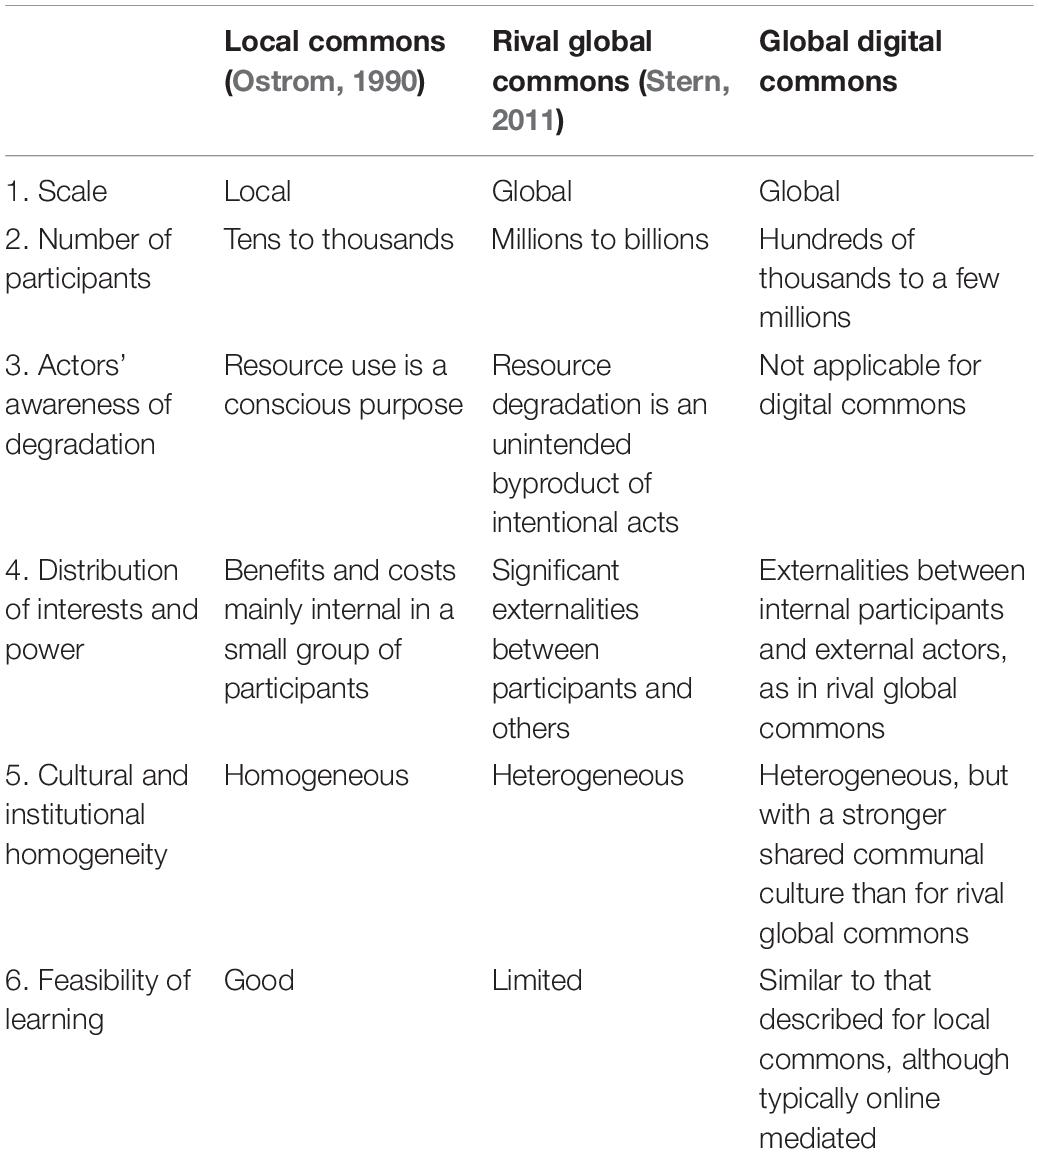 TABLE 1. Differences between local commons (Ostrom, 1990), rival global commons (Stern, 2011) and the type of global digital commons which we will discuss in our analysis.